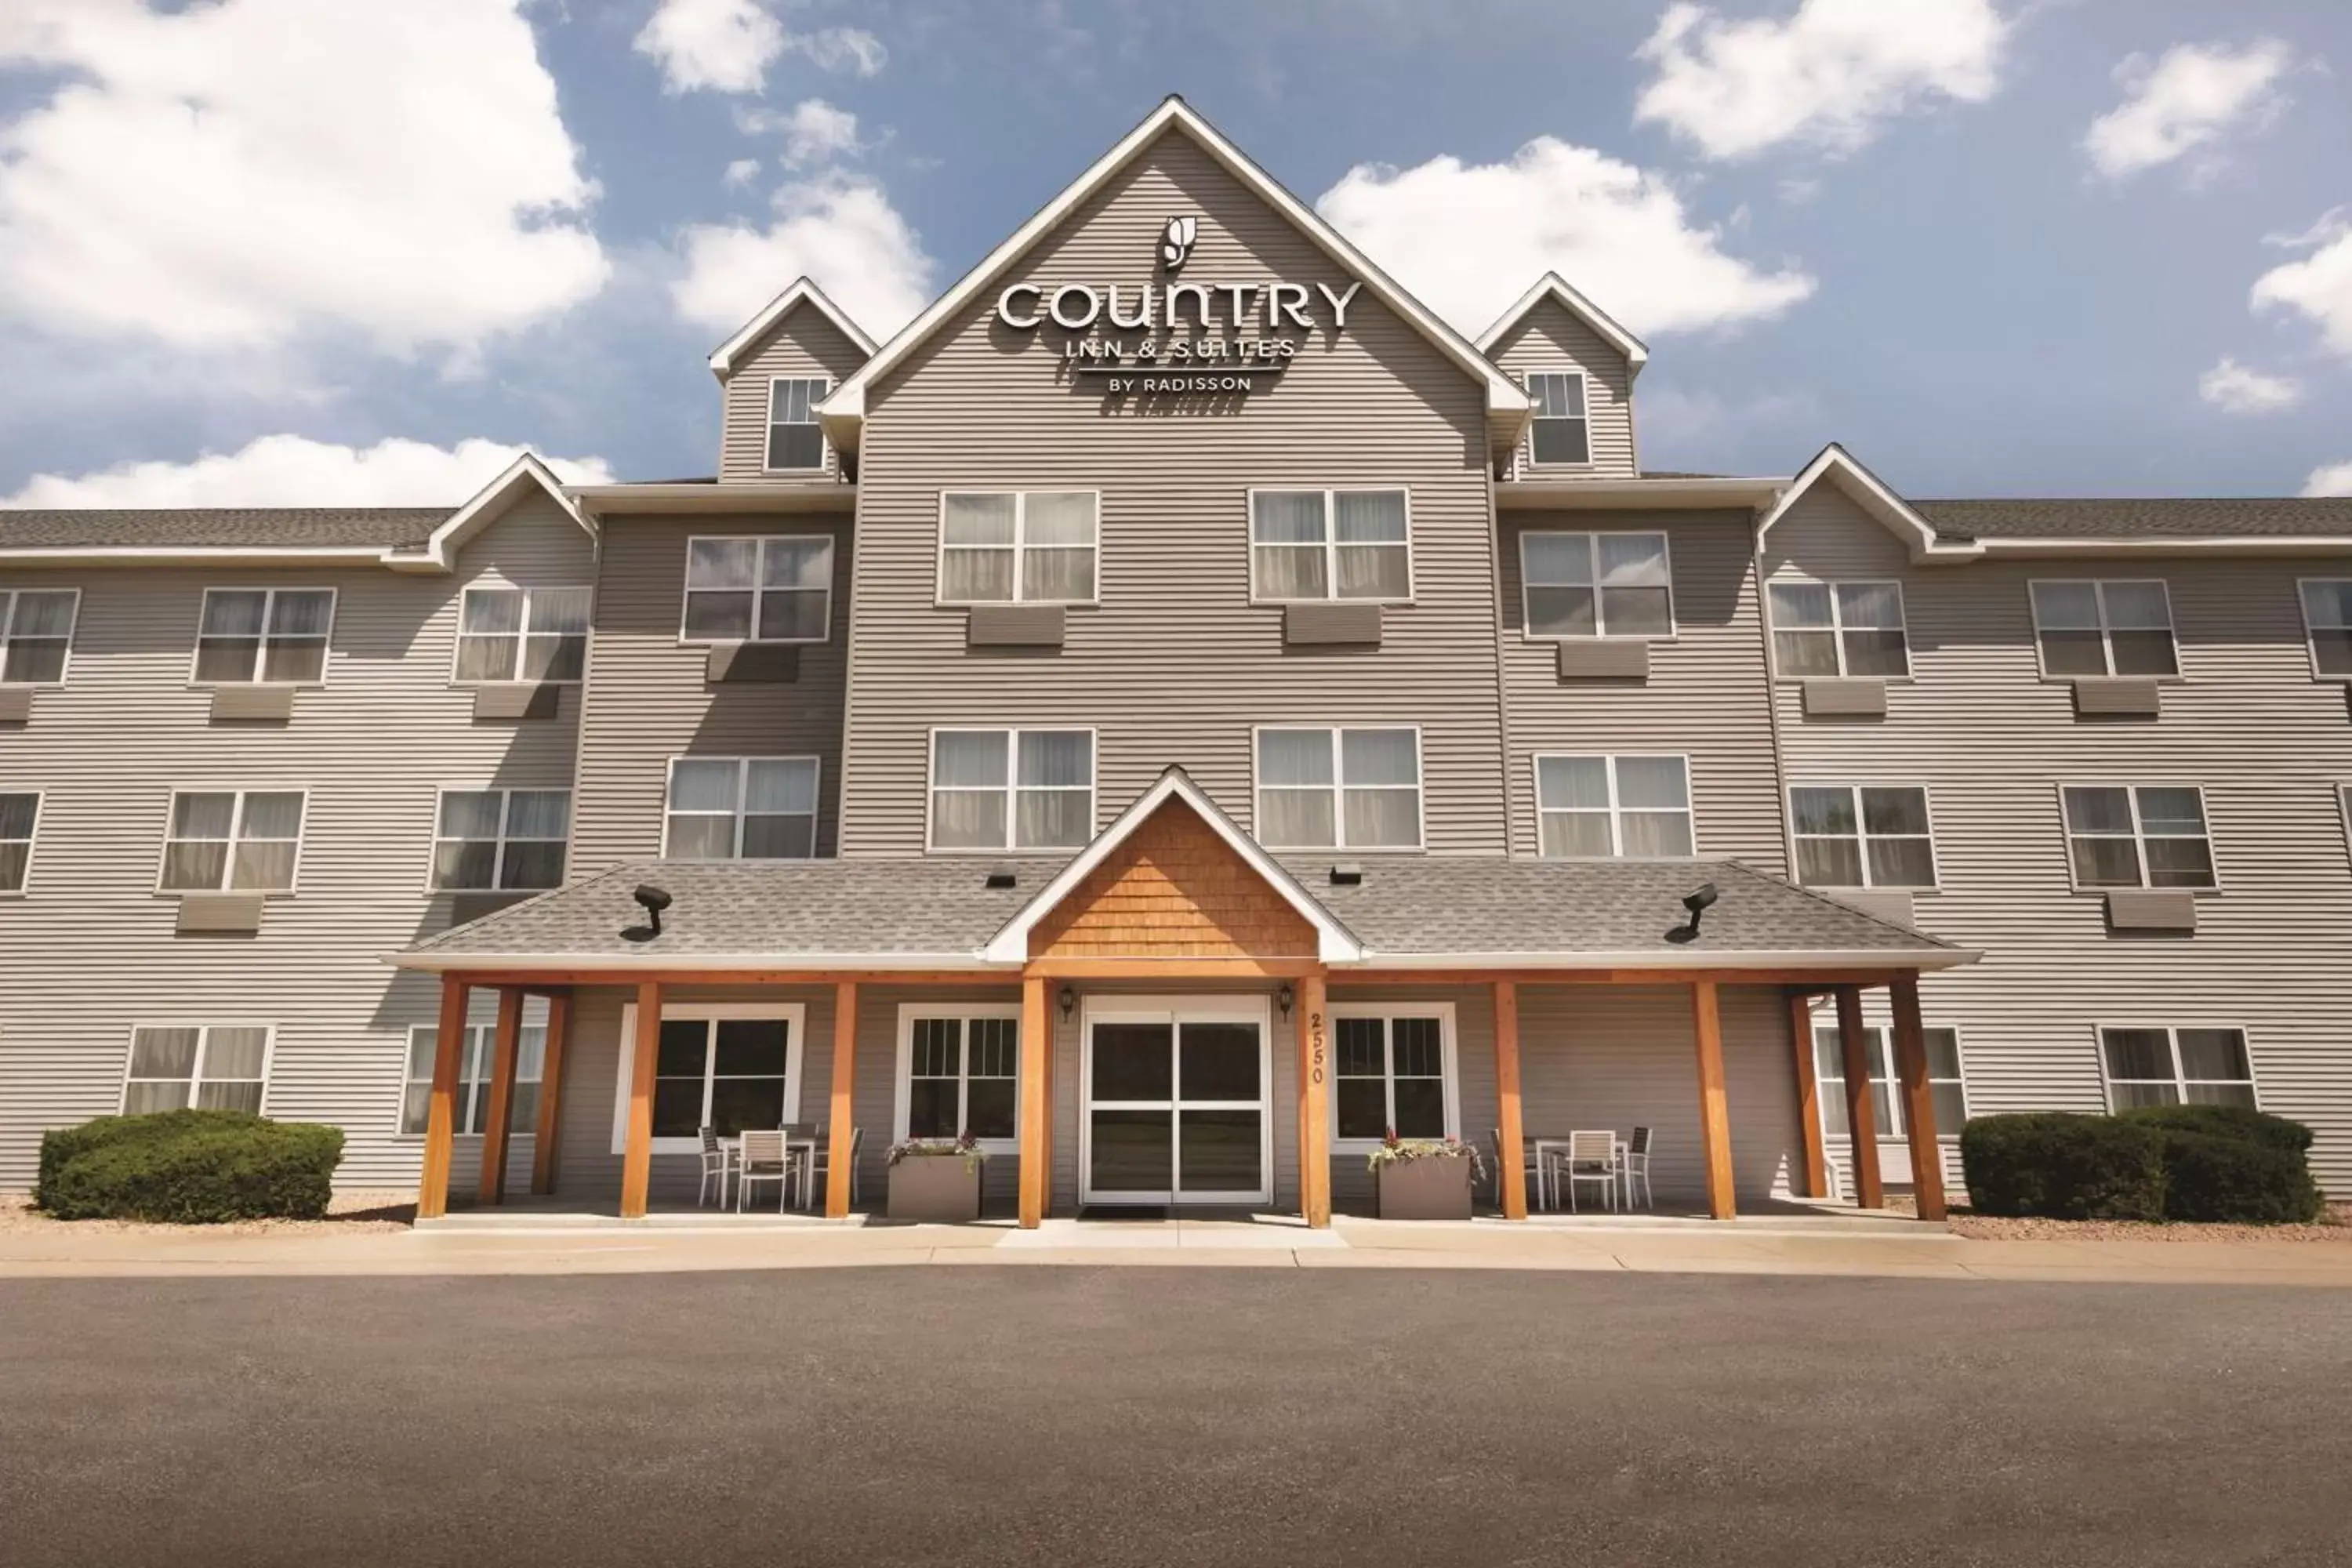 Property building in Country Inn & Suites by Radisson, Brooklyn Center, MN